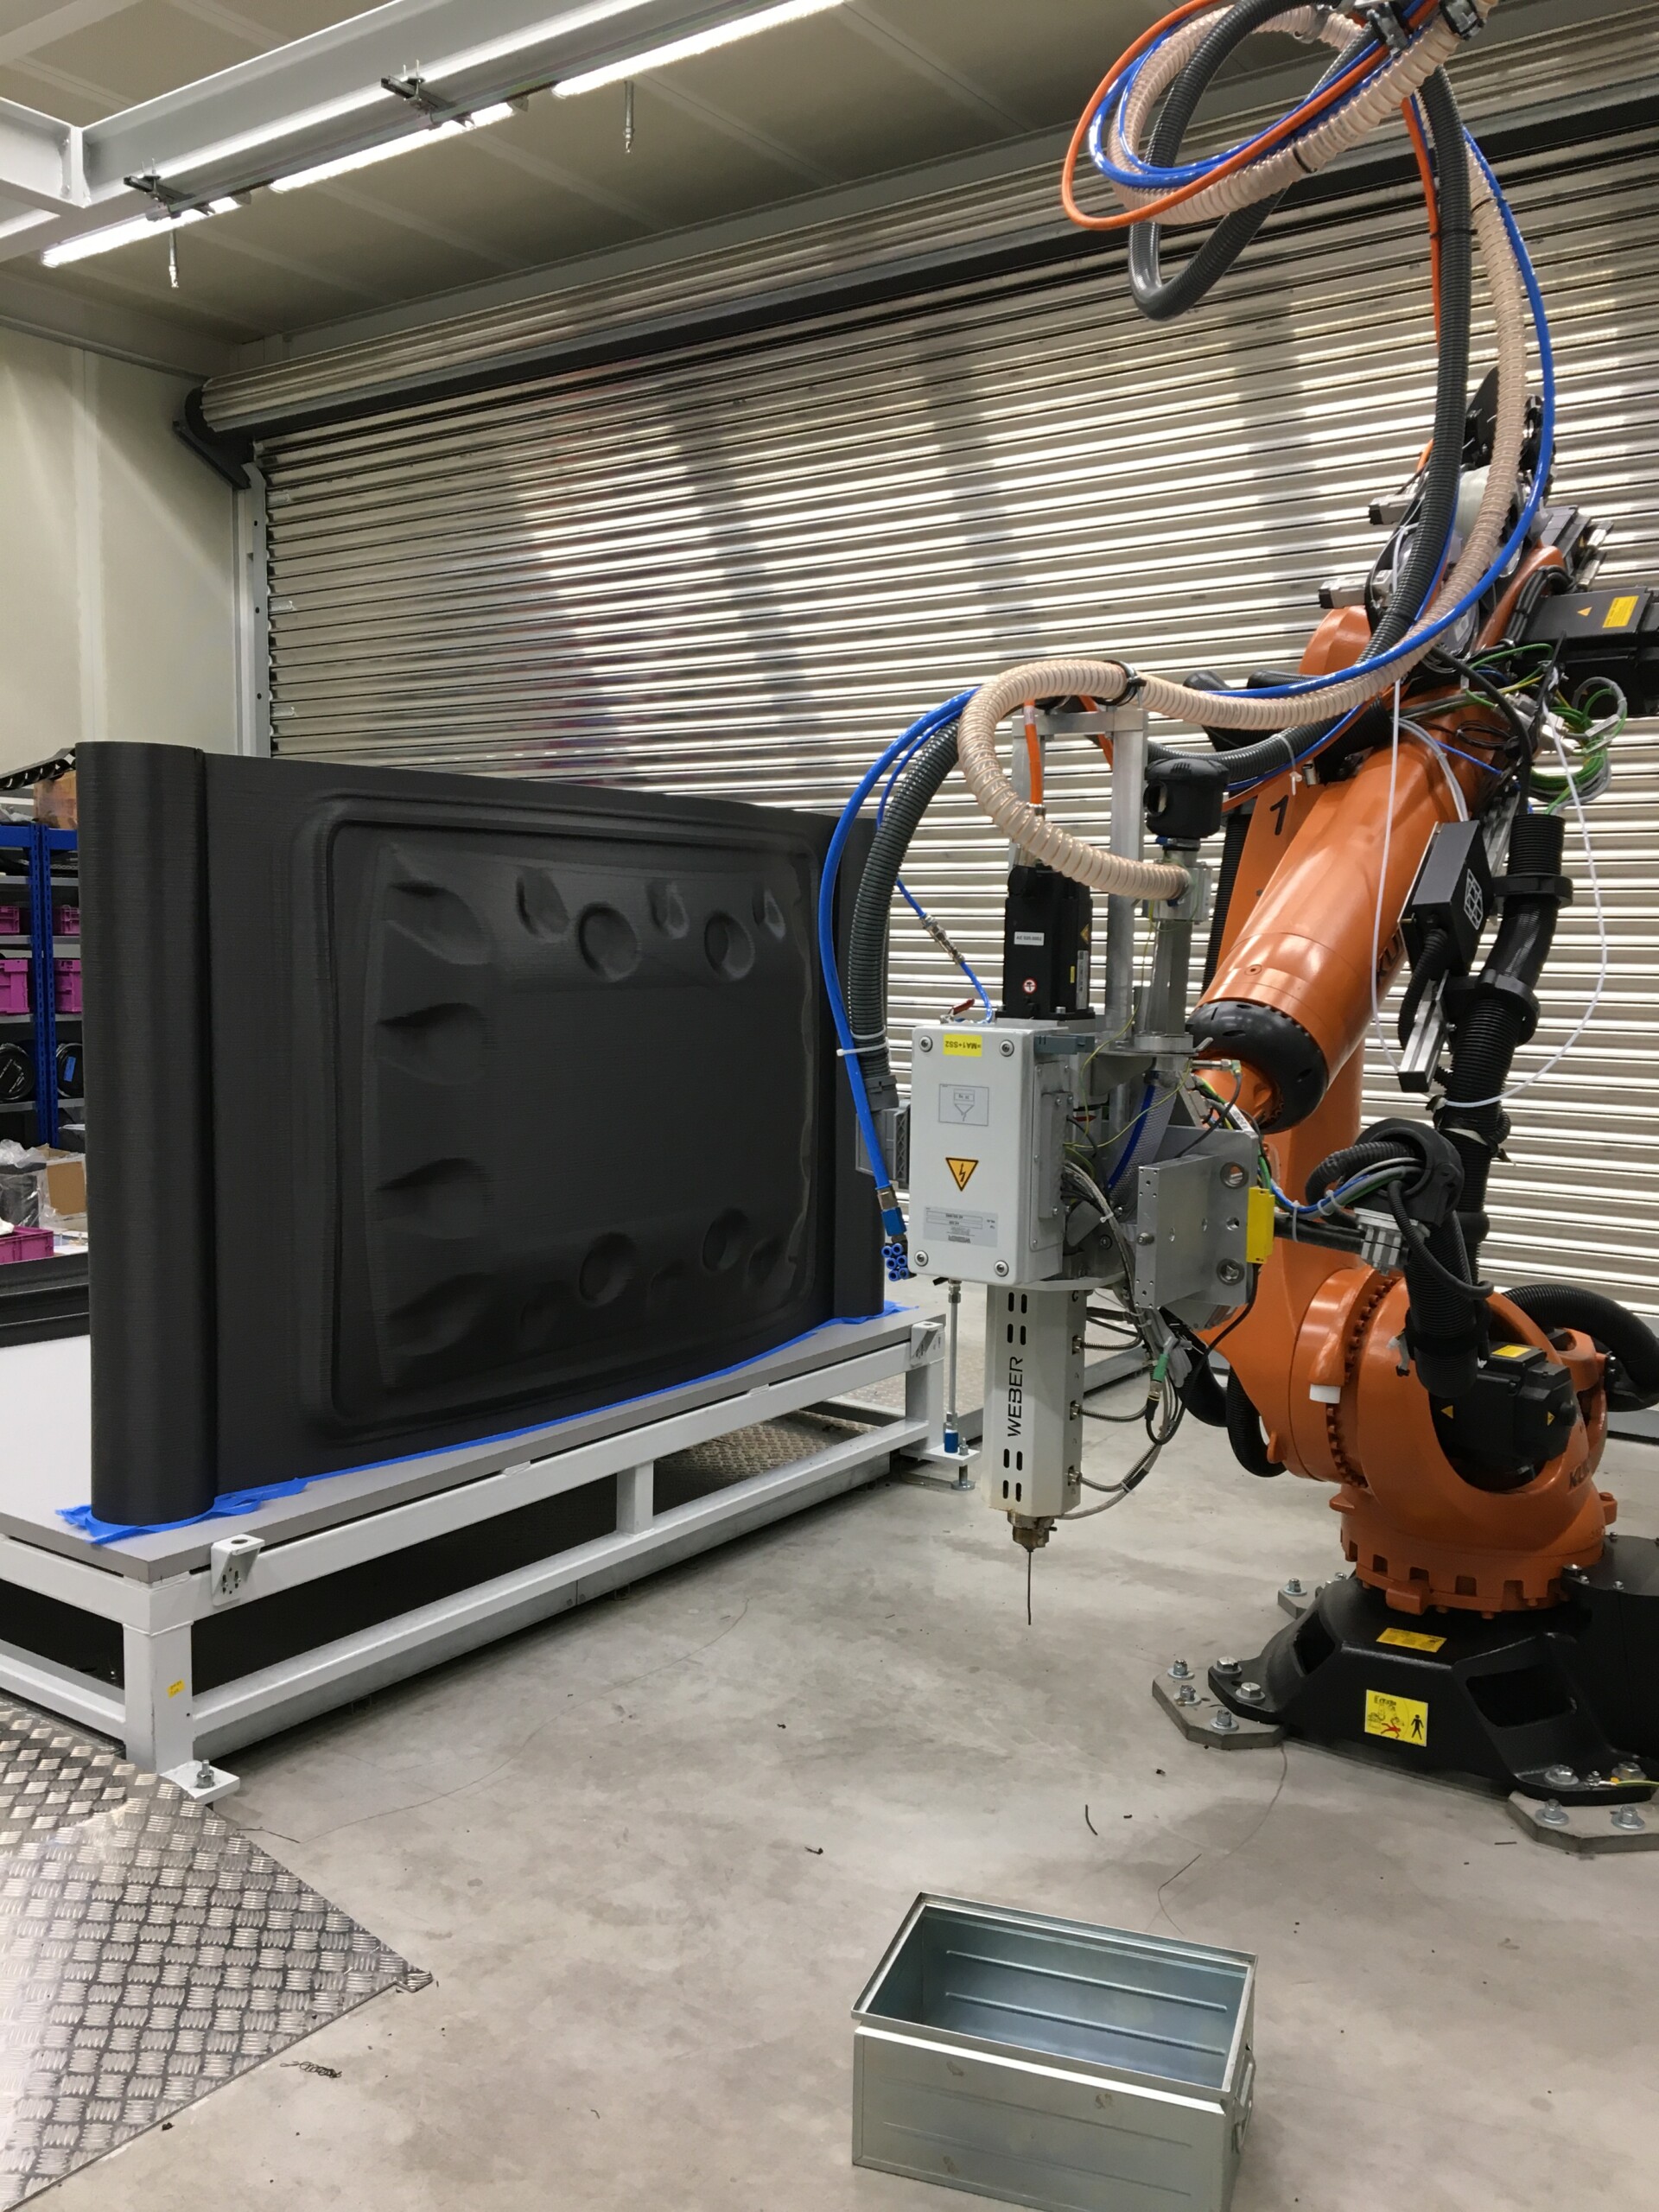 A large part printed with SprutCAM X Robot and KUKA. Image source: BMW Landshut